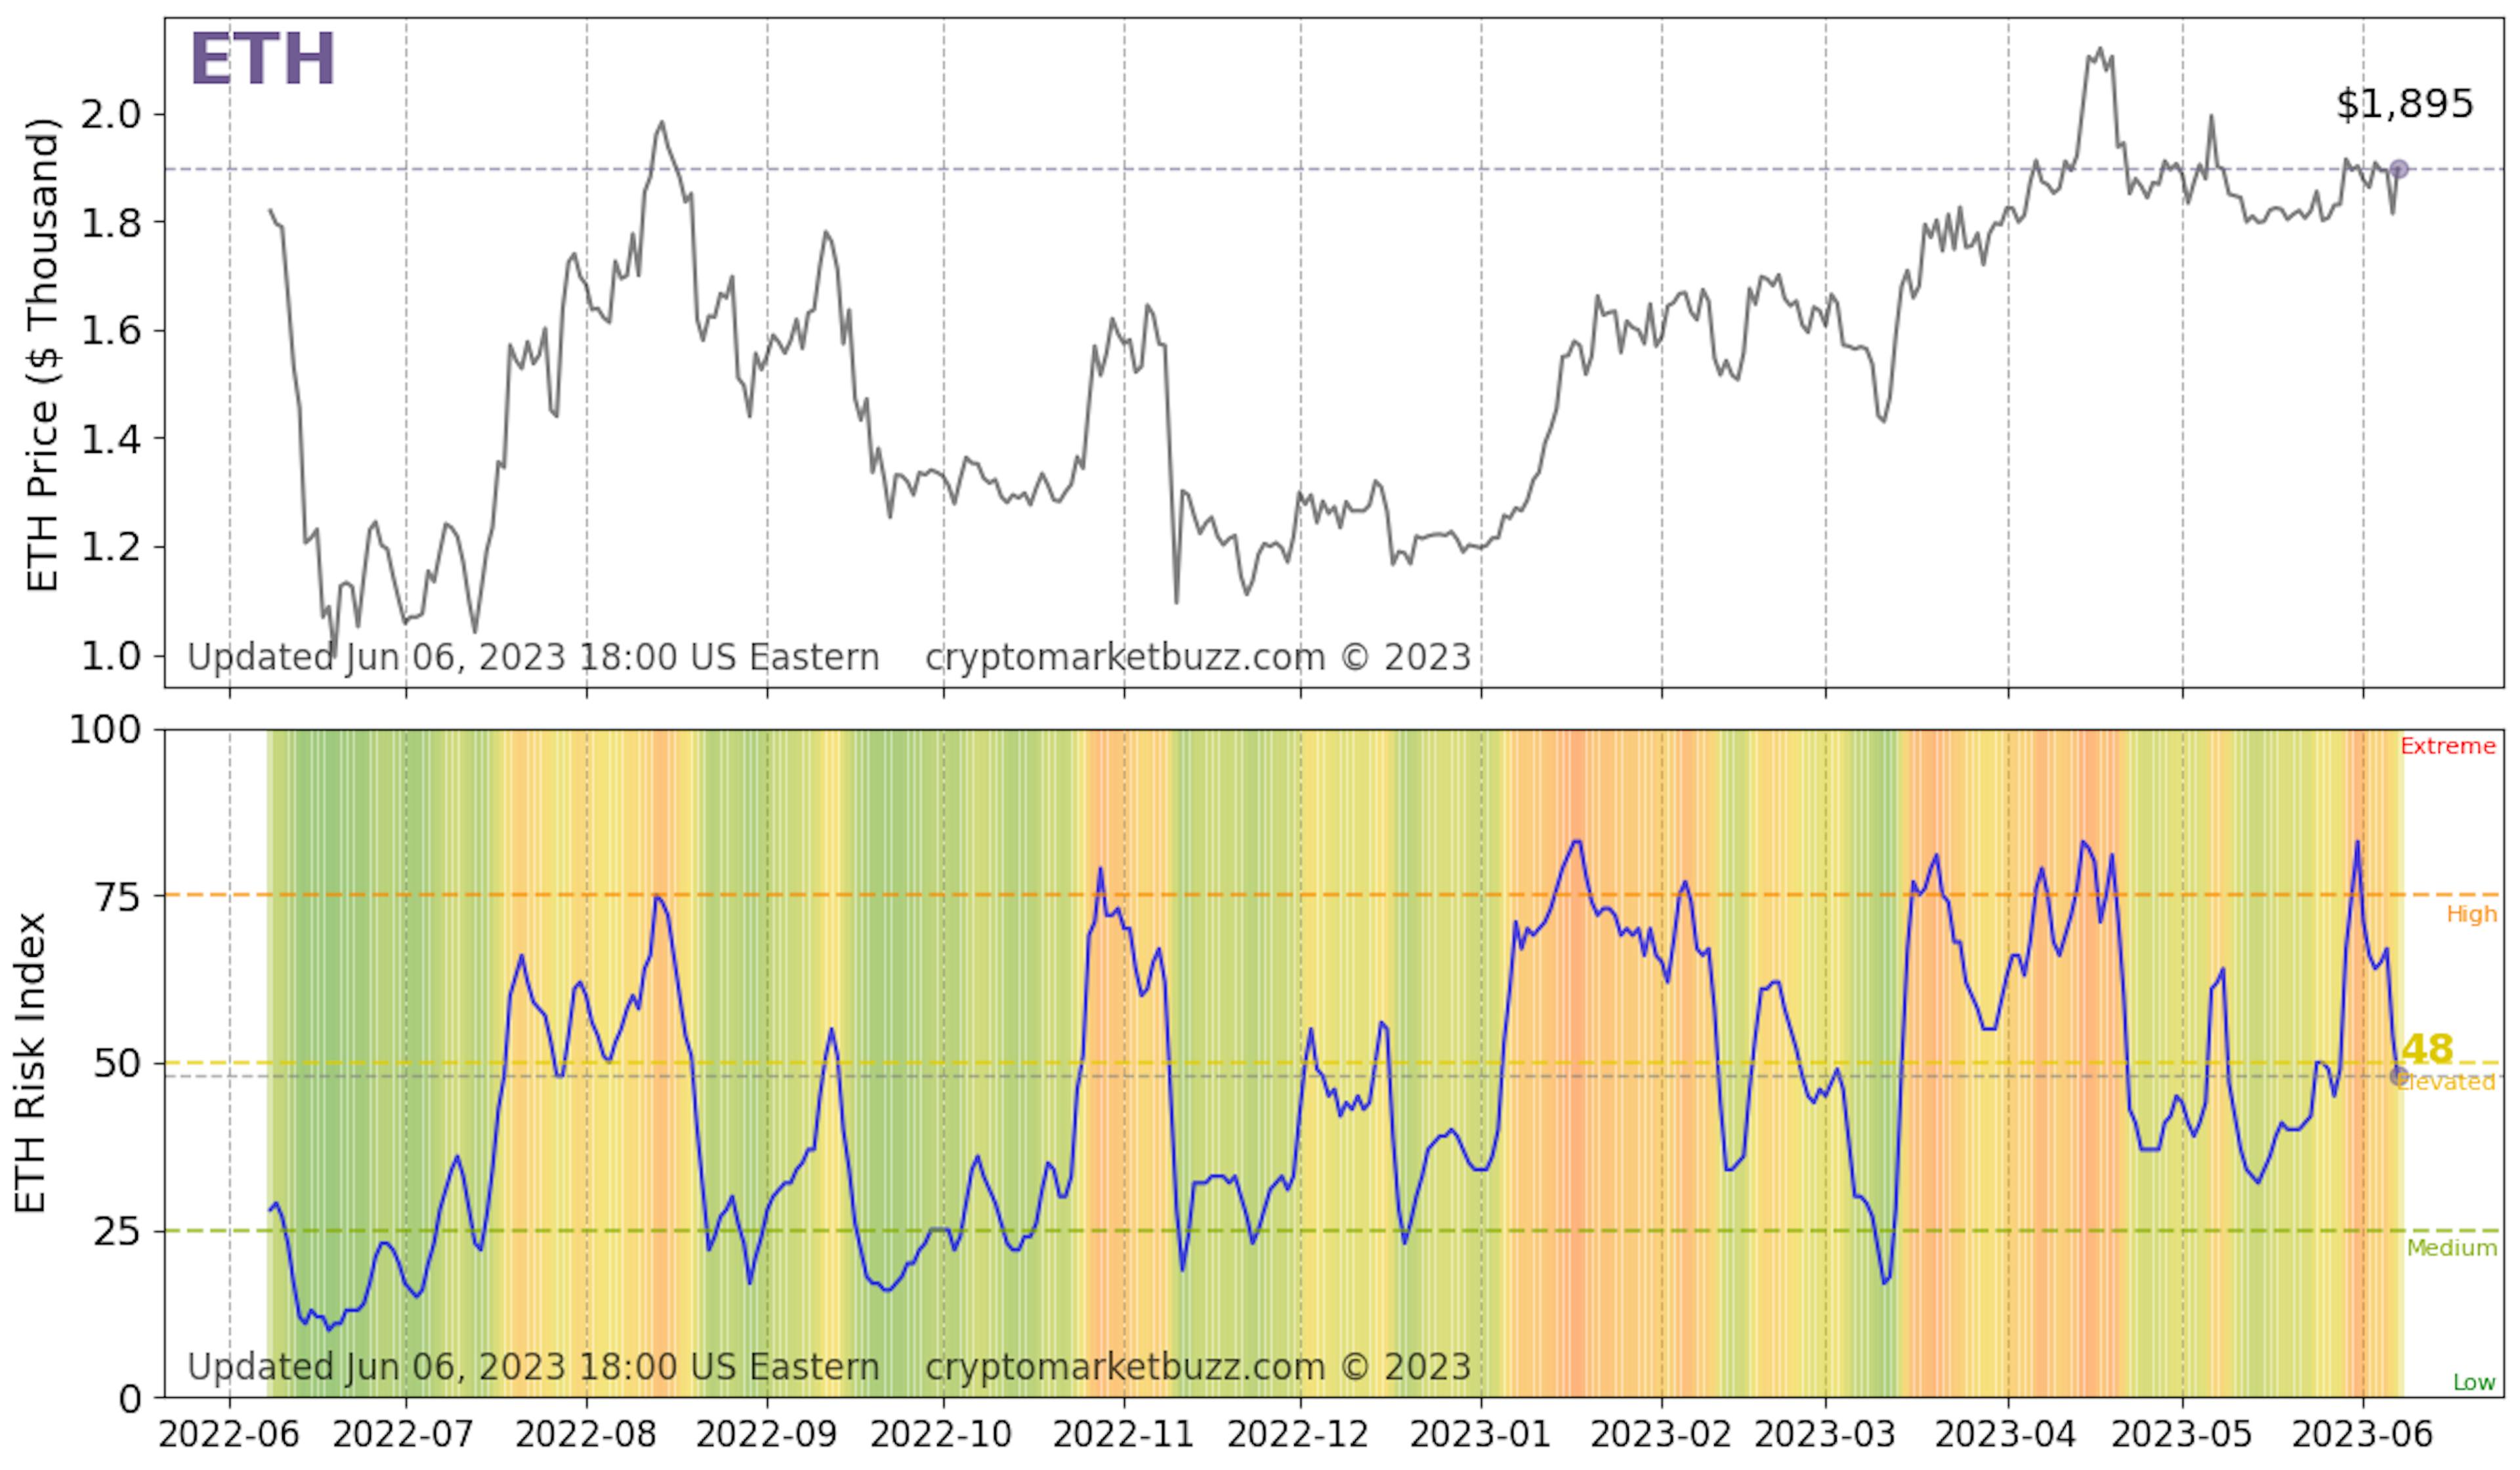 Ethereum Risk Index history from https://cryptomarketbuzz.com/ as of June 6, 2023